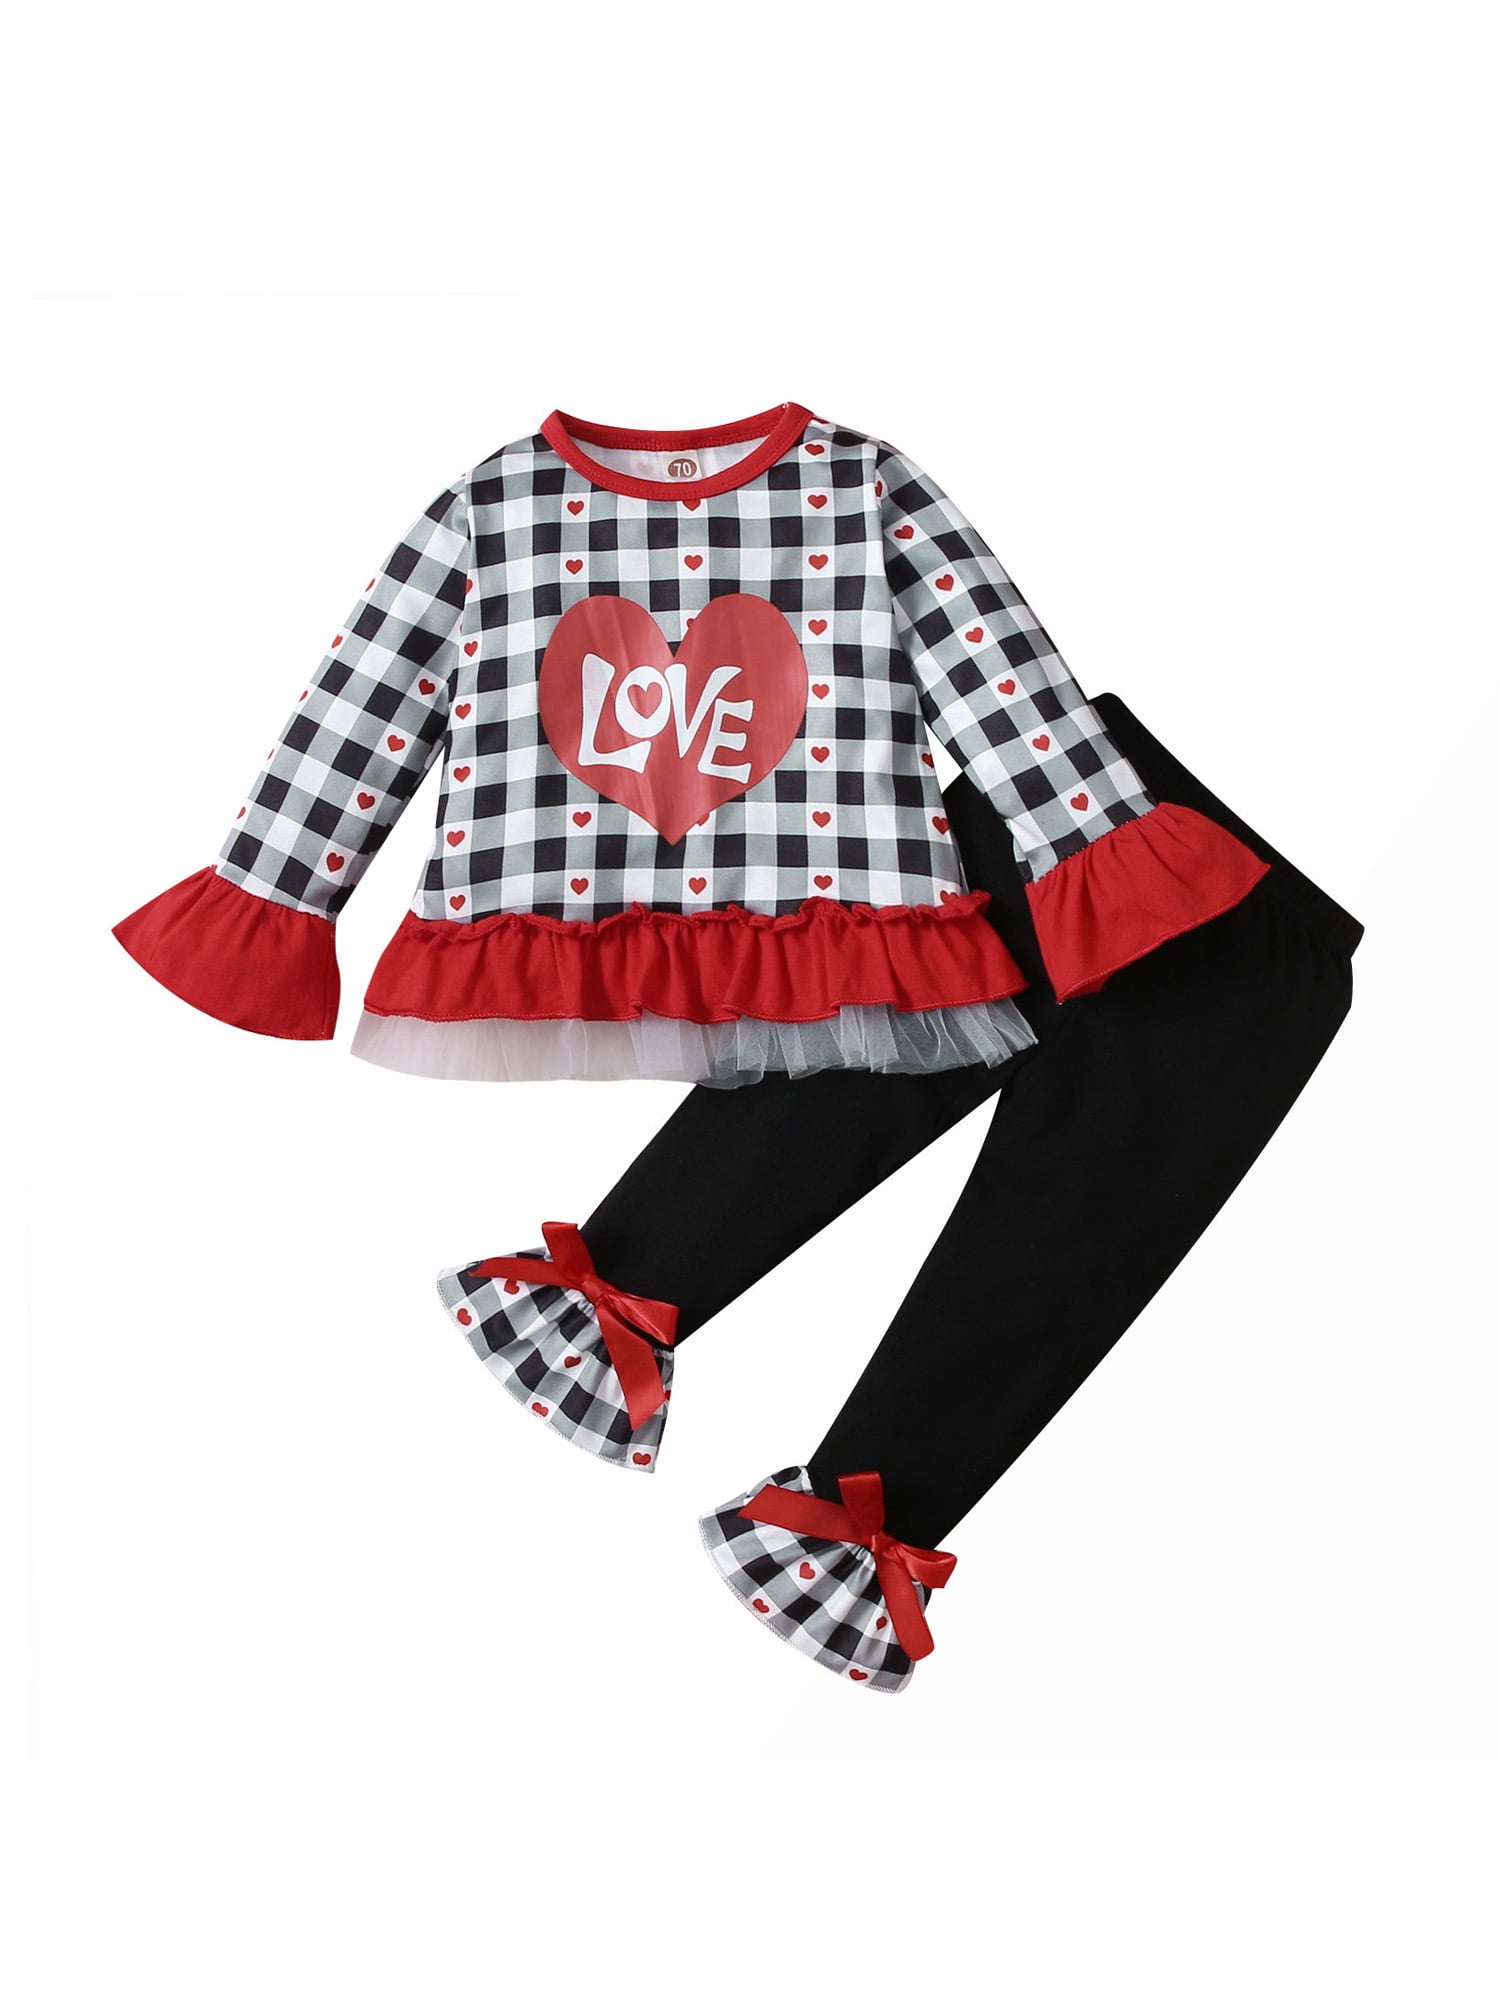 Bebiullo Infant Baby Girls Valentine's Day Outfits Plaid Love Heart ...